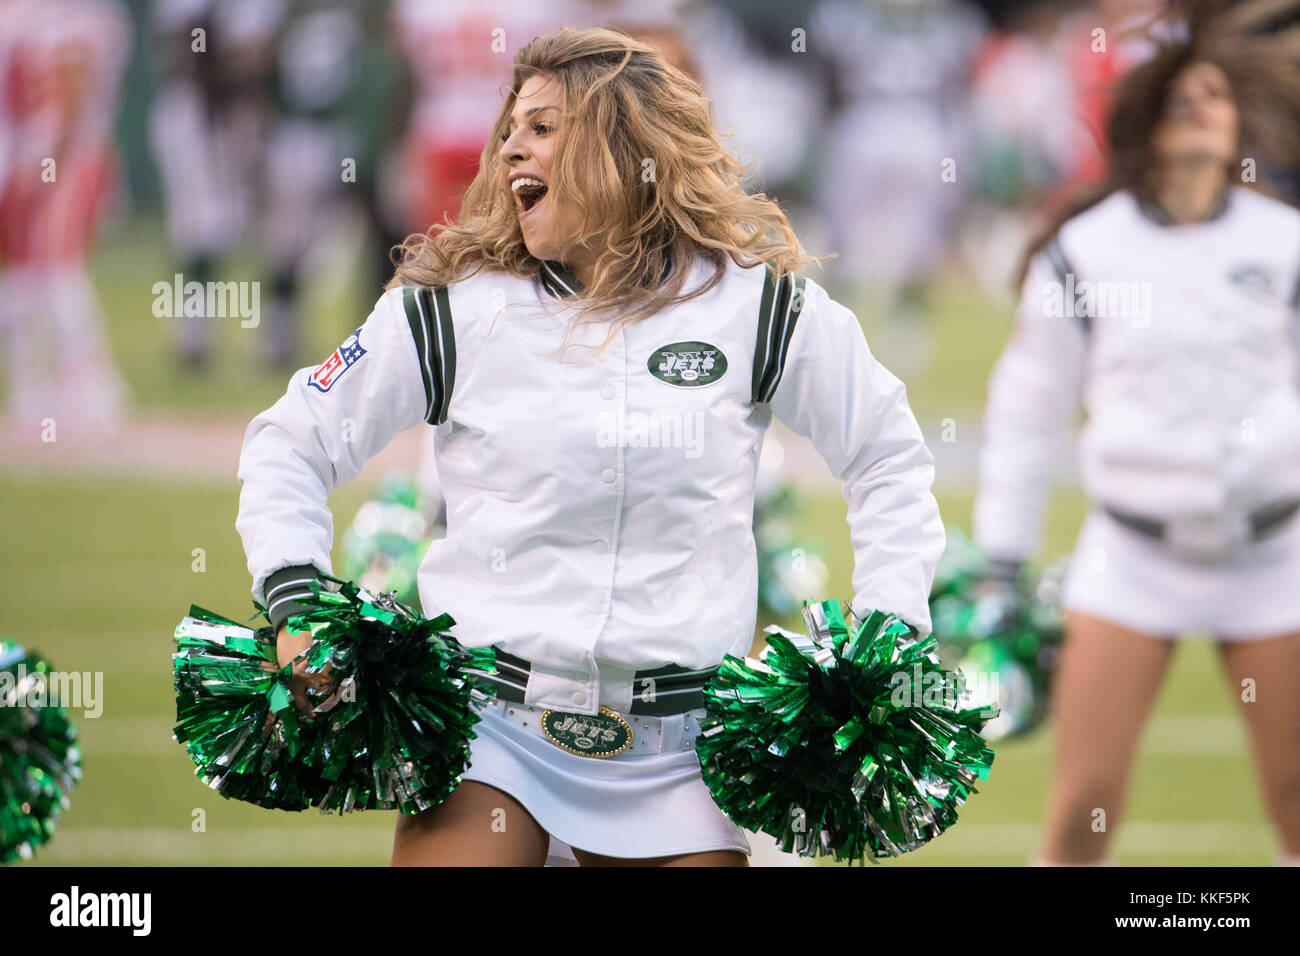 East Rutherford, New Jersey, USA. 3rd Dec, 2017. New York Jets Flight Crew in action during the NFL game between the Kansas City Chiefs and the New York Jets at MetLife Stadium in East Rutherford, New Jersey. The New York Jets won 38-31. Christopher Szagola/CSM/Alamy Live News Stock Photo